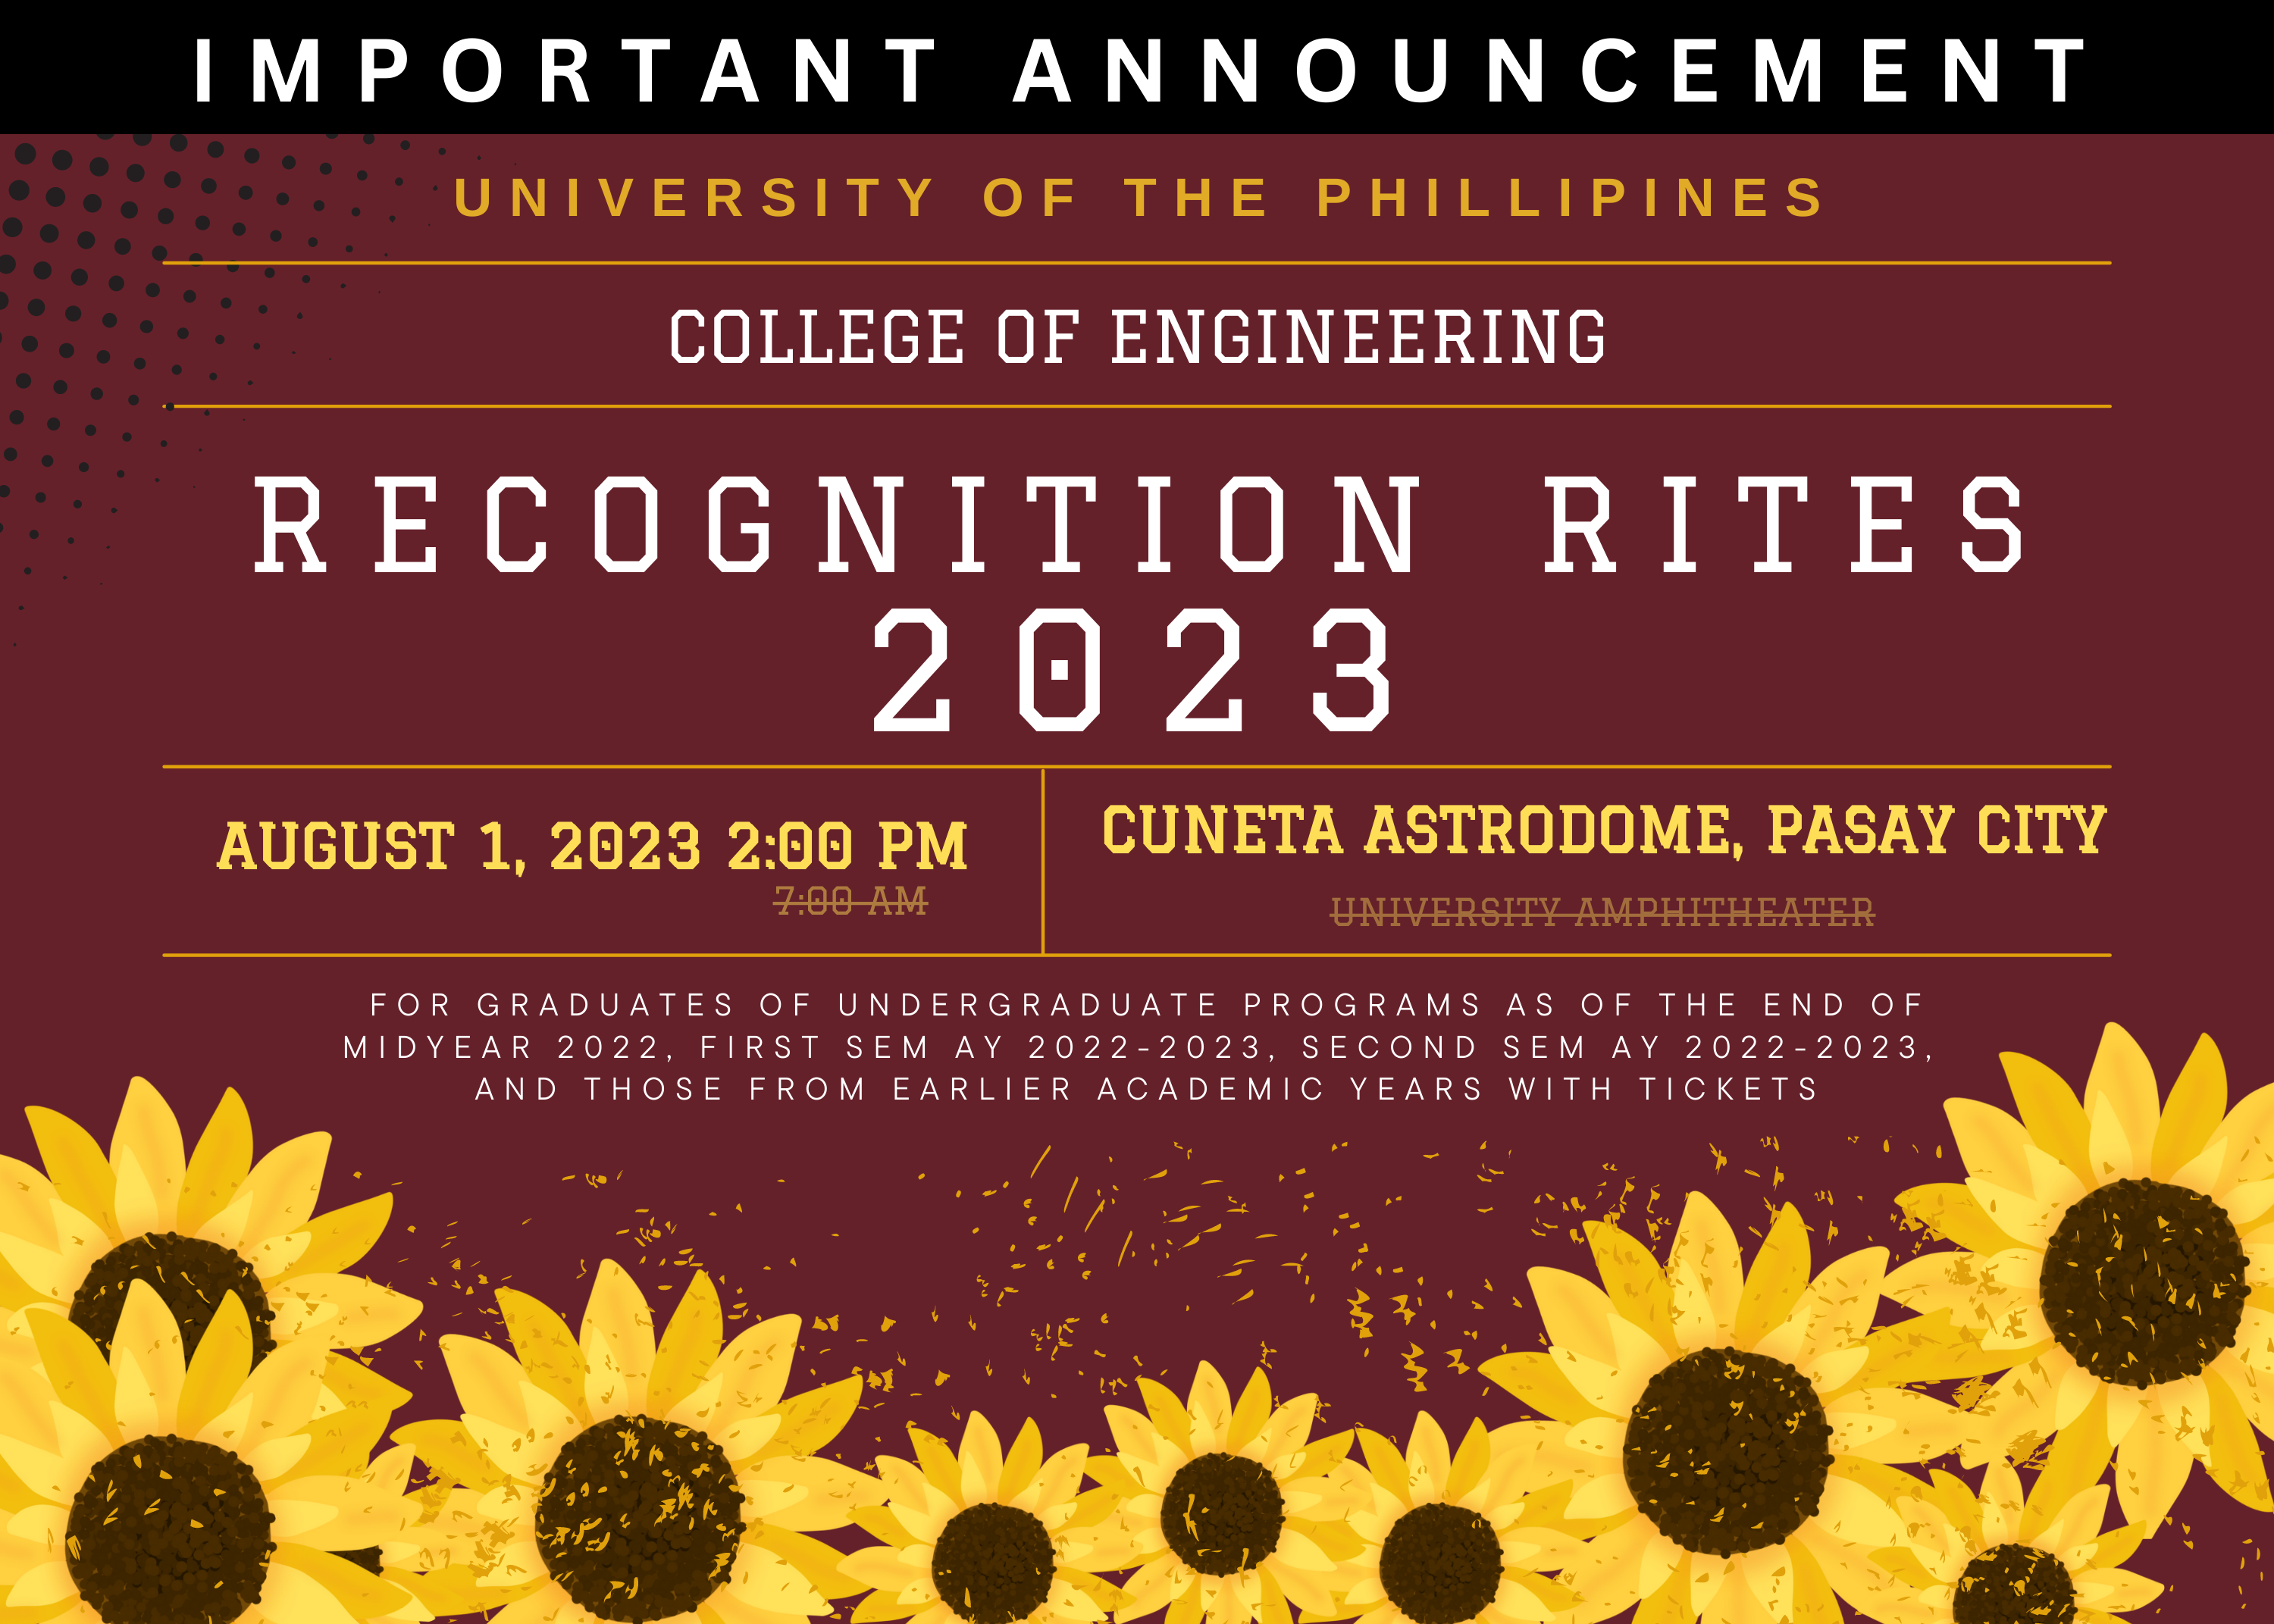 UPDATED VENUE & TIME of the UP Diliman College of Engineering Recognition Rites 2023